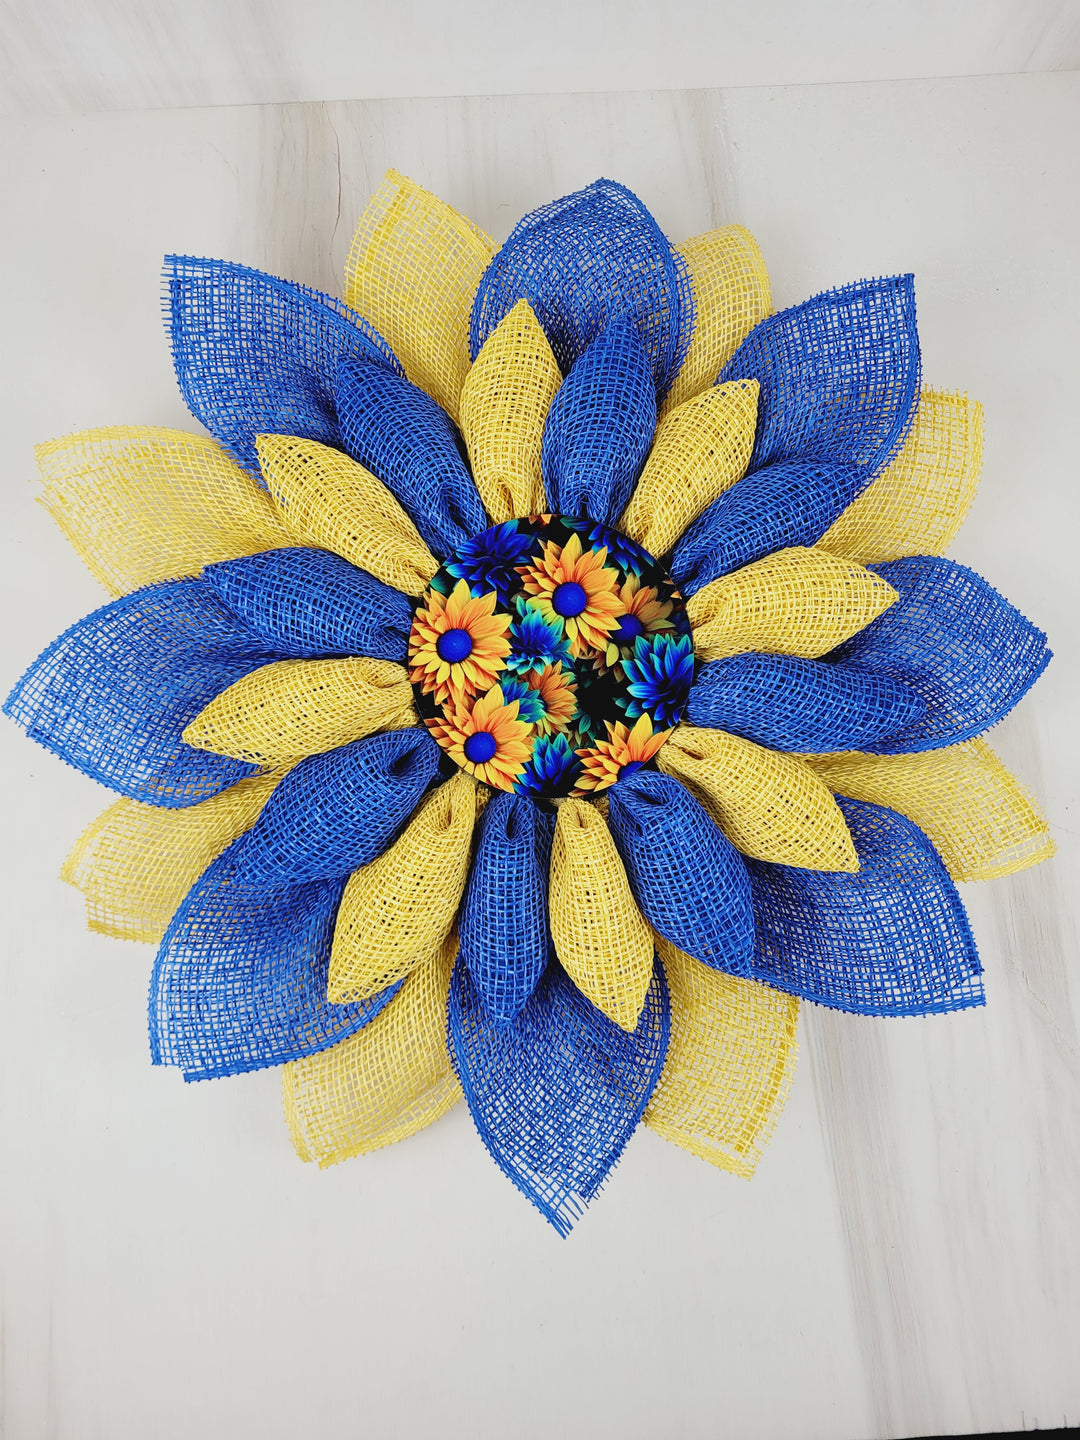 You & Home, Yellow & Blue Sunflower Wreath